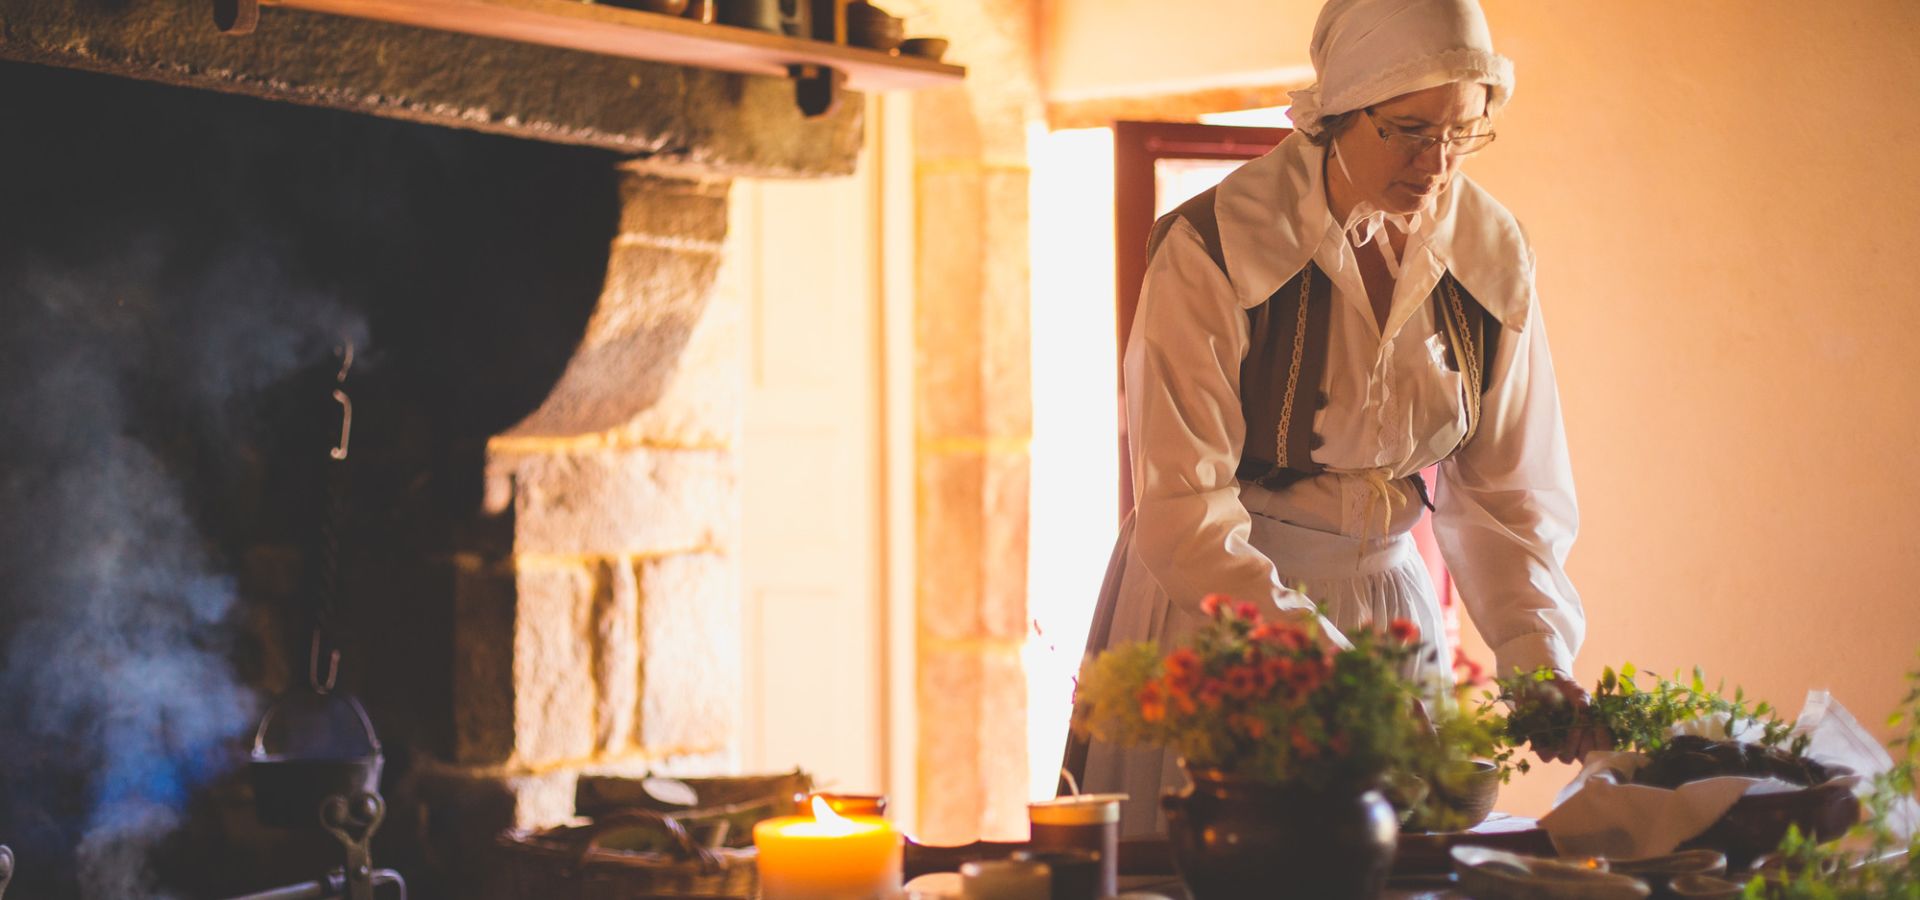 A living history actress cooking at Hamptonne Country Life Museum